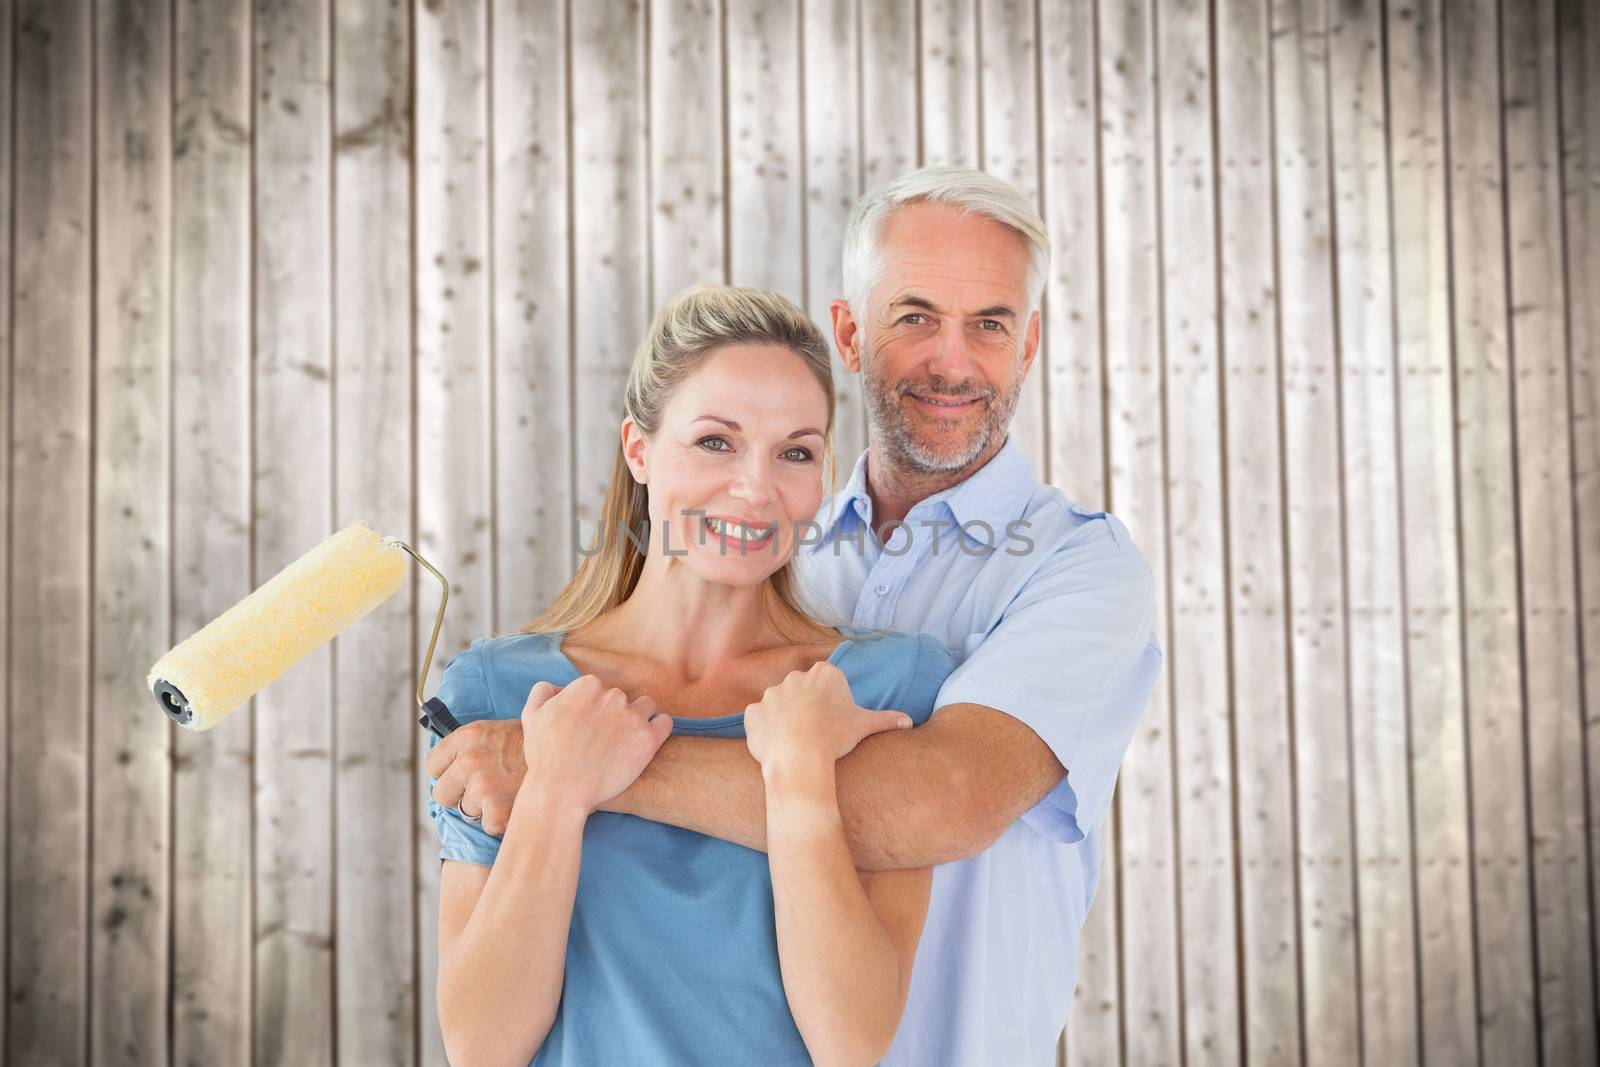 Happy couple hugging and holding paint roller against wooden planks background